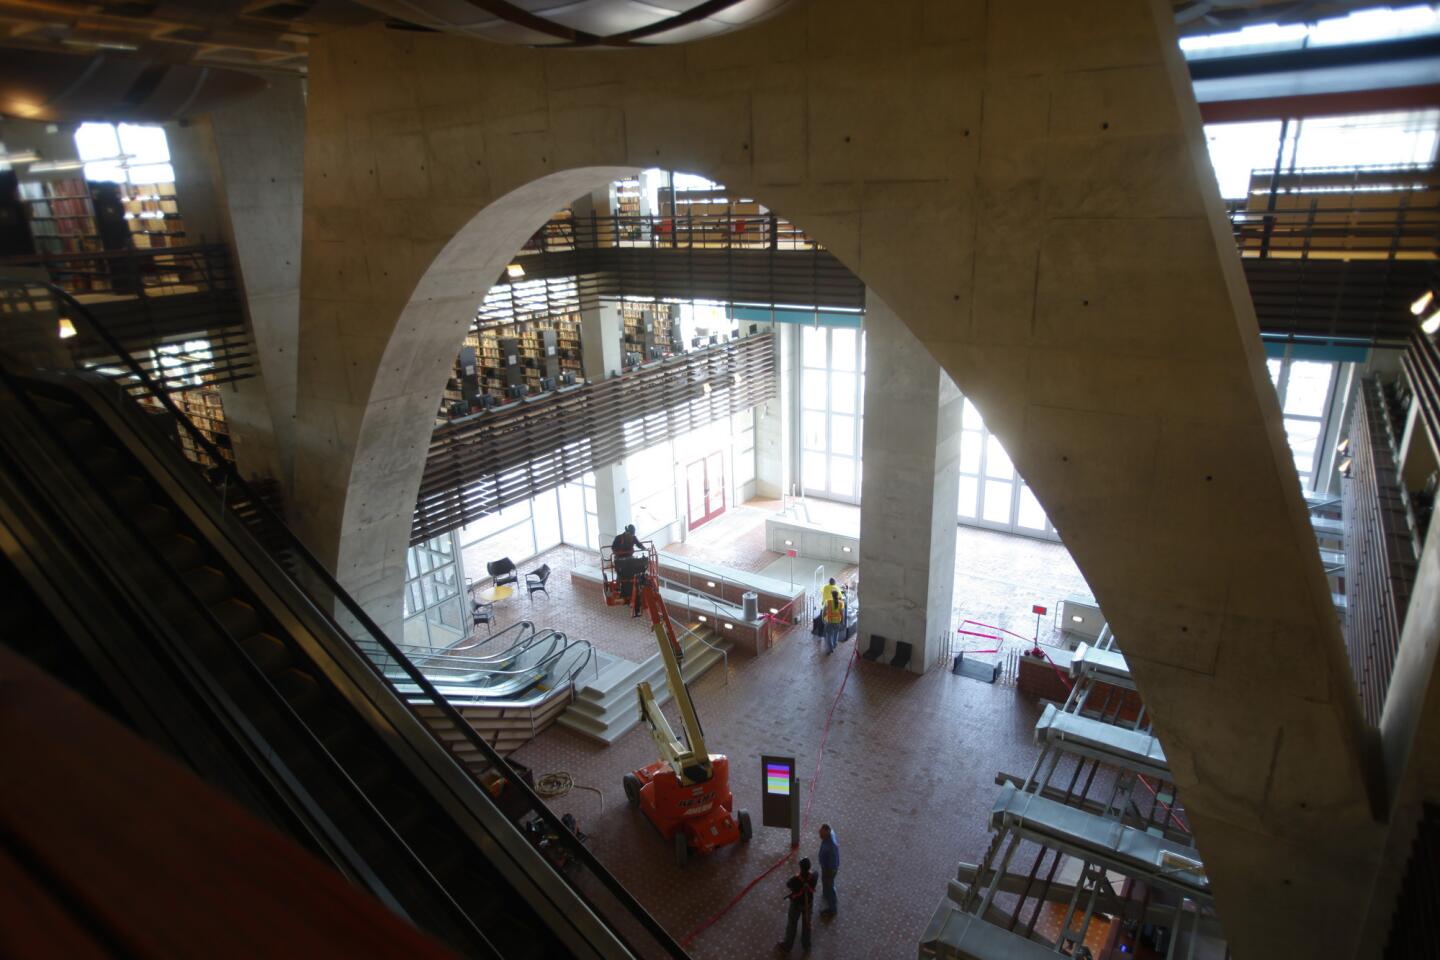 San Diego's new library: The ground floor